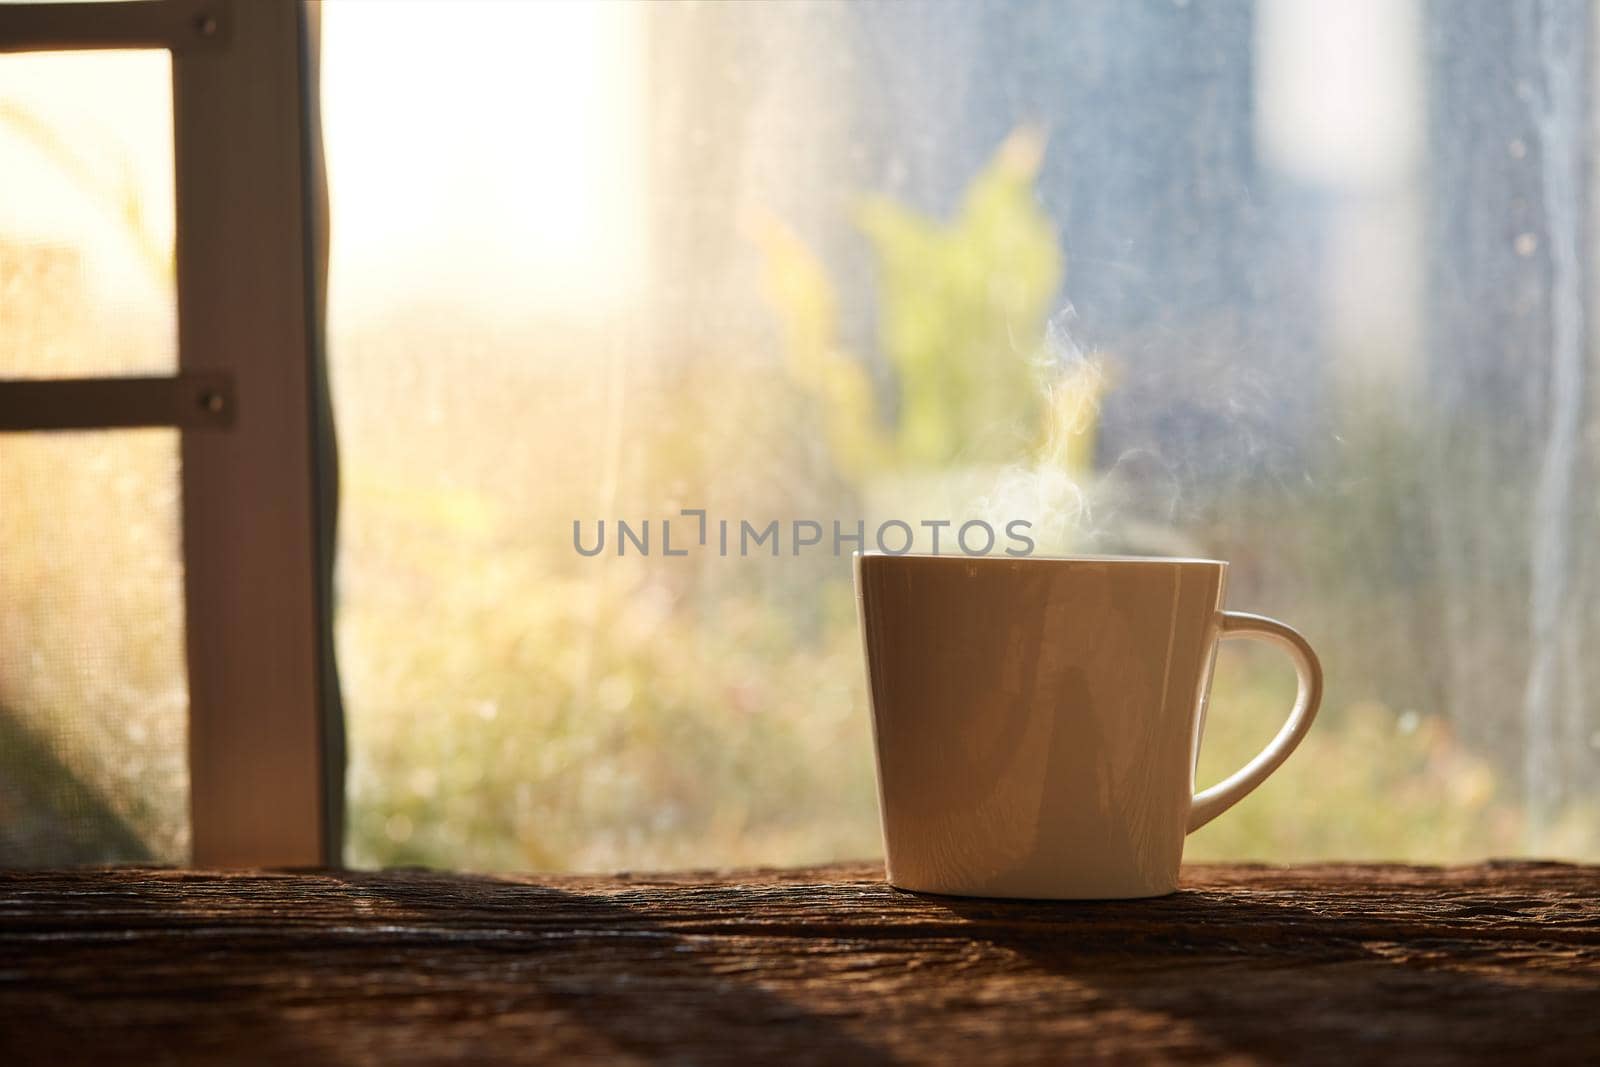 A cup of coffee on the wood floor in the morning sunshine beside window